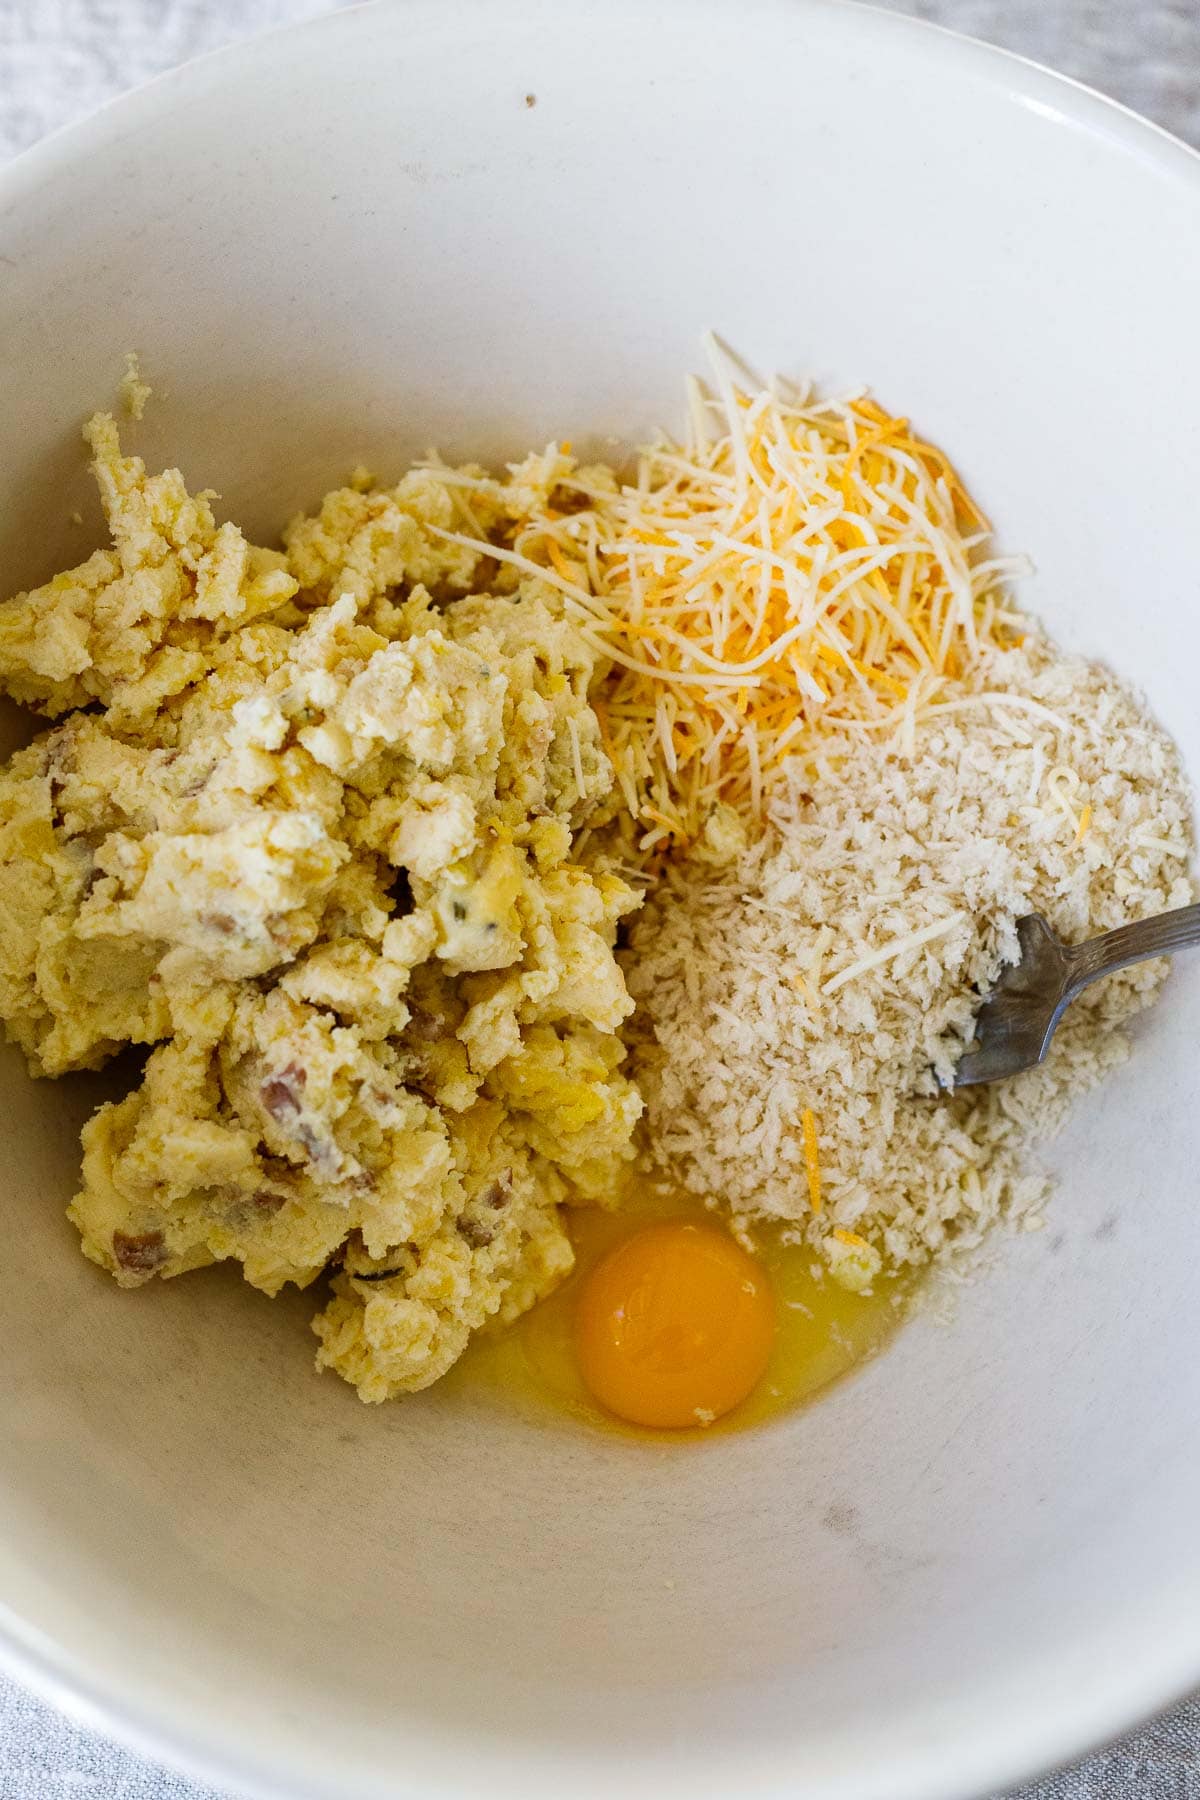 ingredients for mashed potato cakes in mixing bowl - leftover mashed potatoes, grated cheese, panko, egg